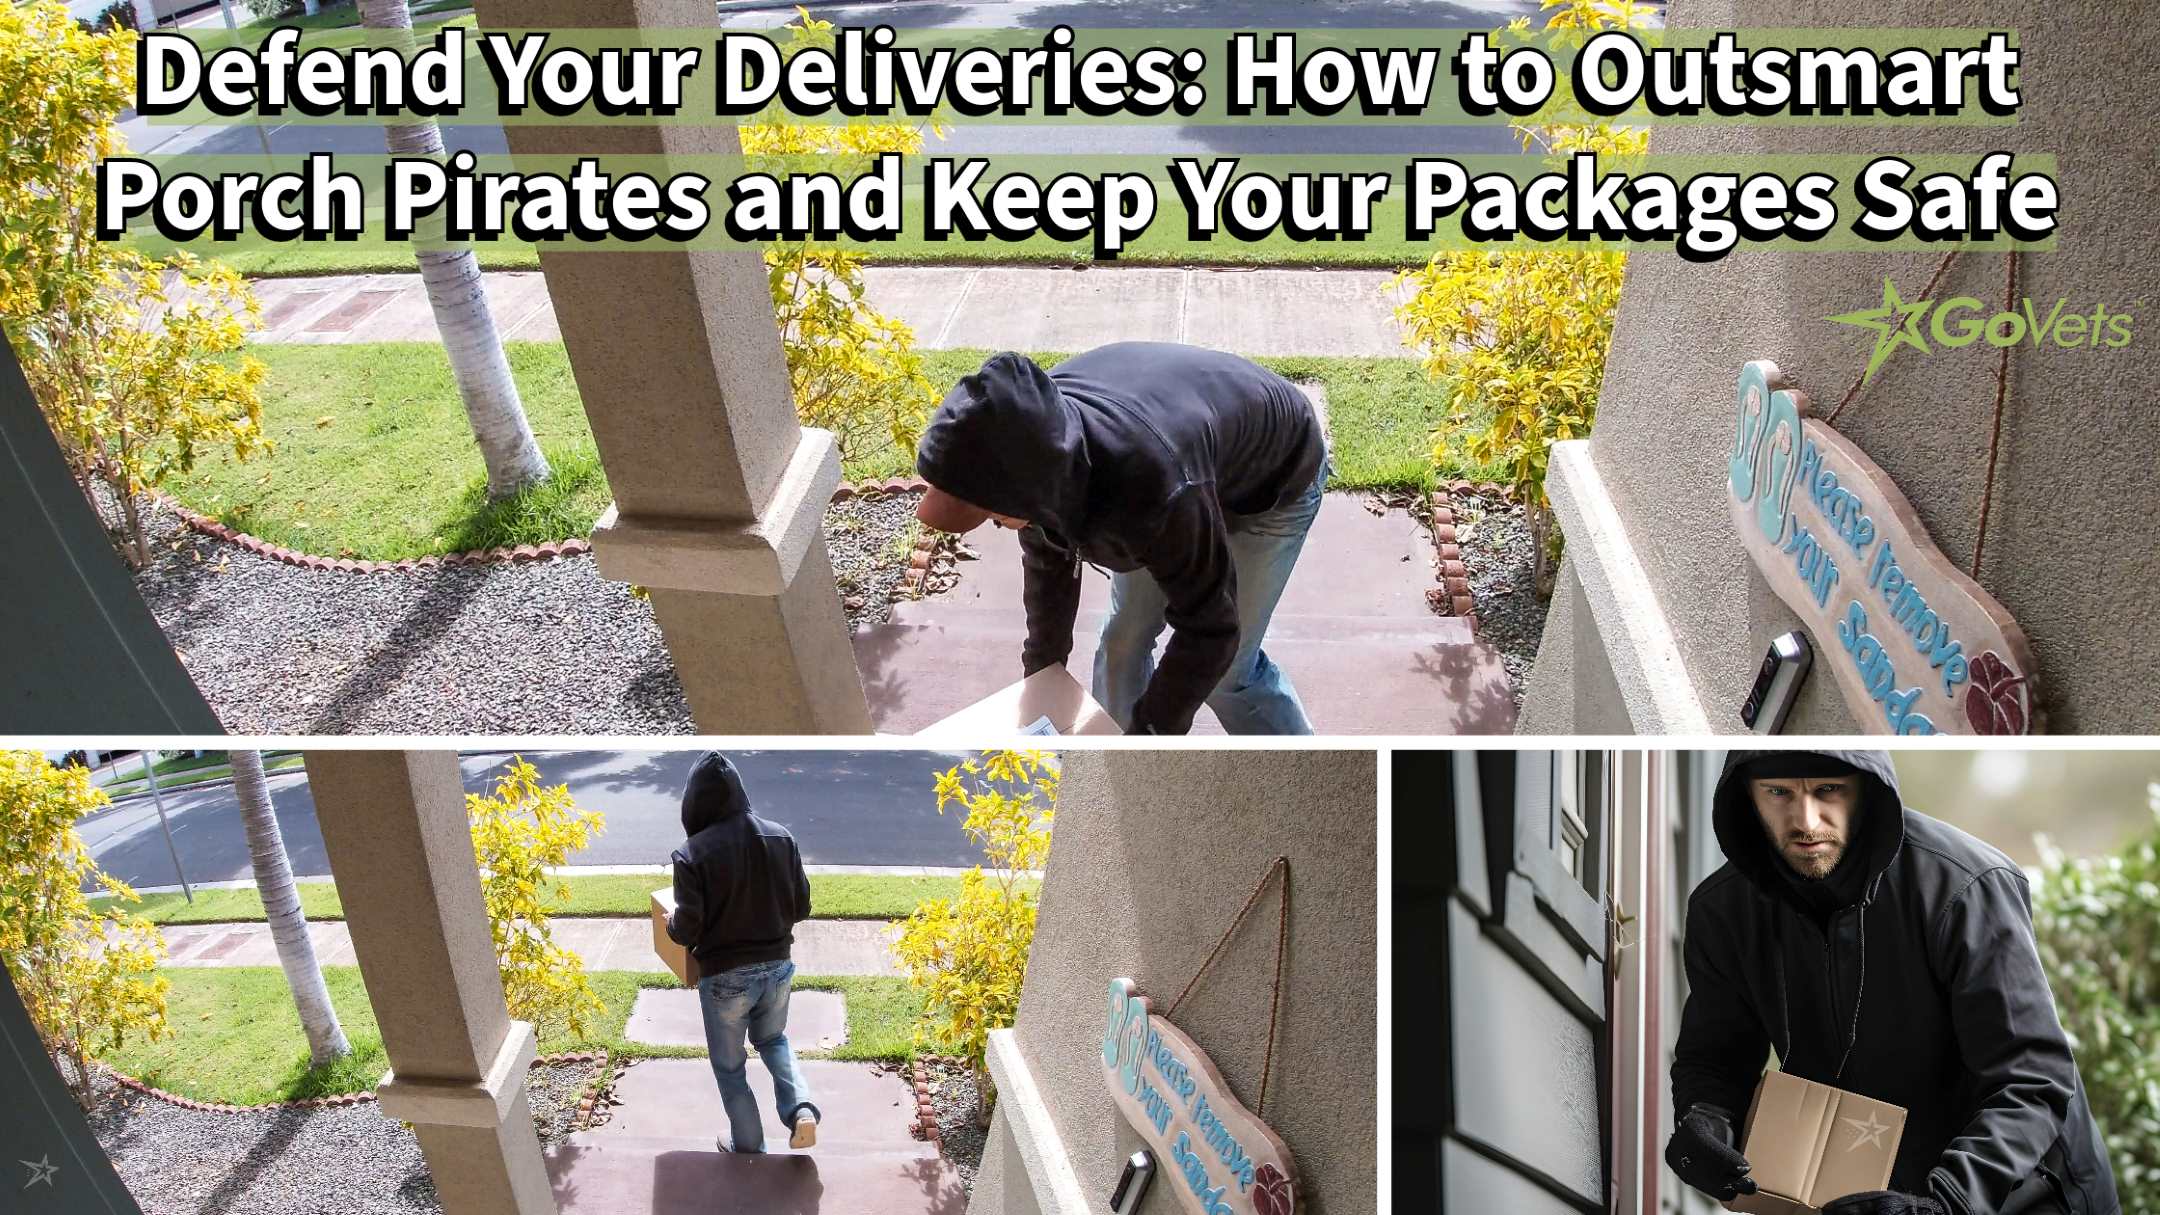 Defend Your Deliveries - Outsmart Porch Pirates and Keep Your Packages Safe